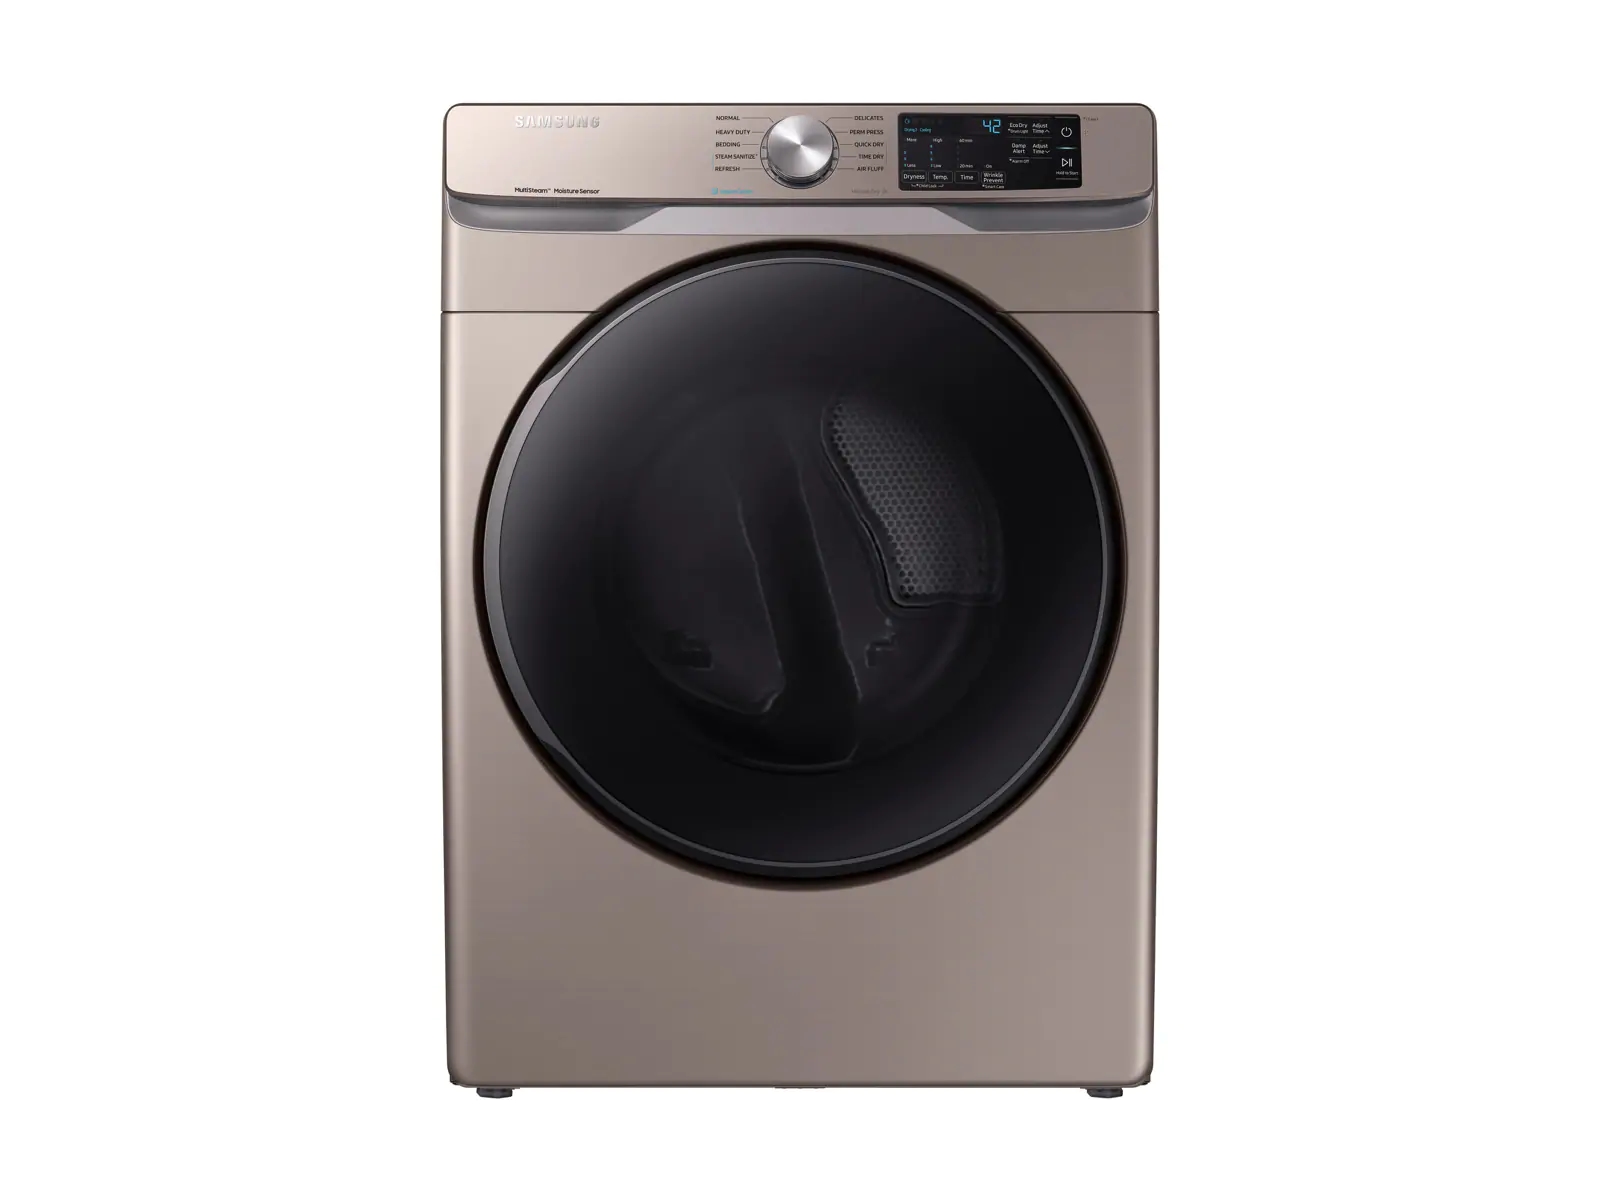 Photos - Tumble Dryer Samsung 7.5 cu. ft. Gas Dryer with Steam Sanitize+ in Champagne(DVG45R6100 